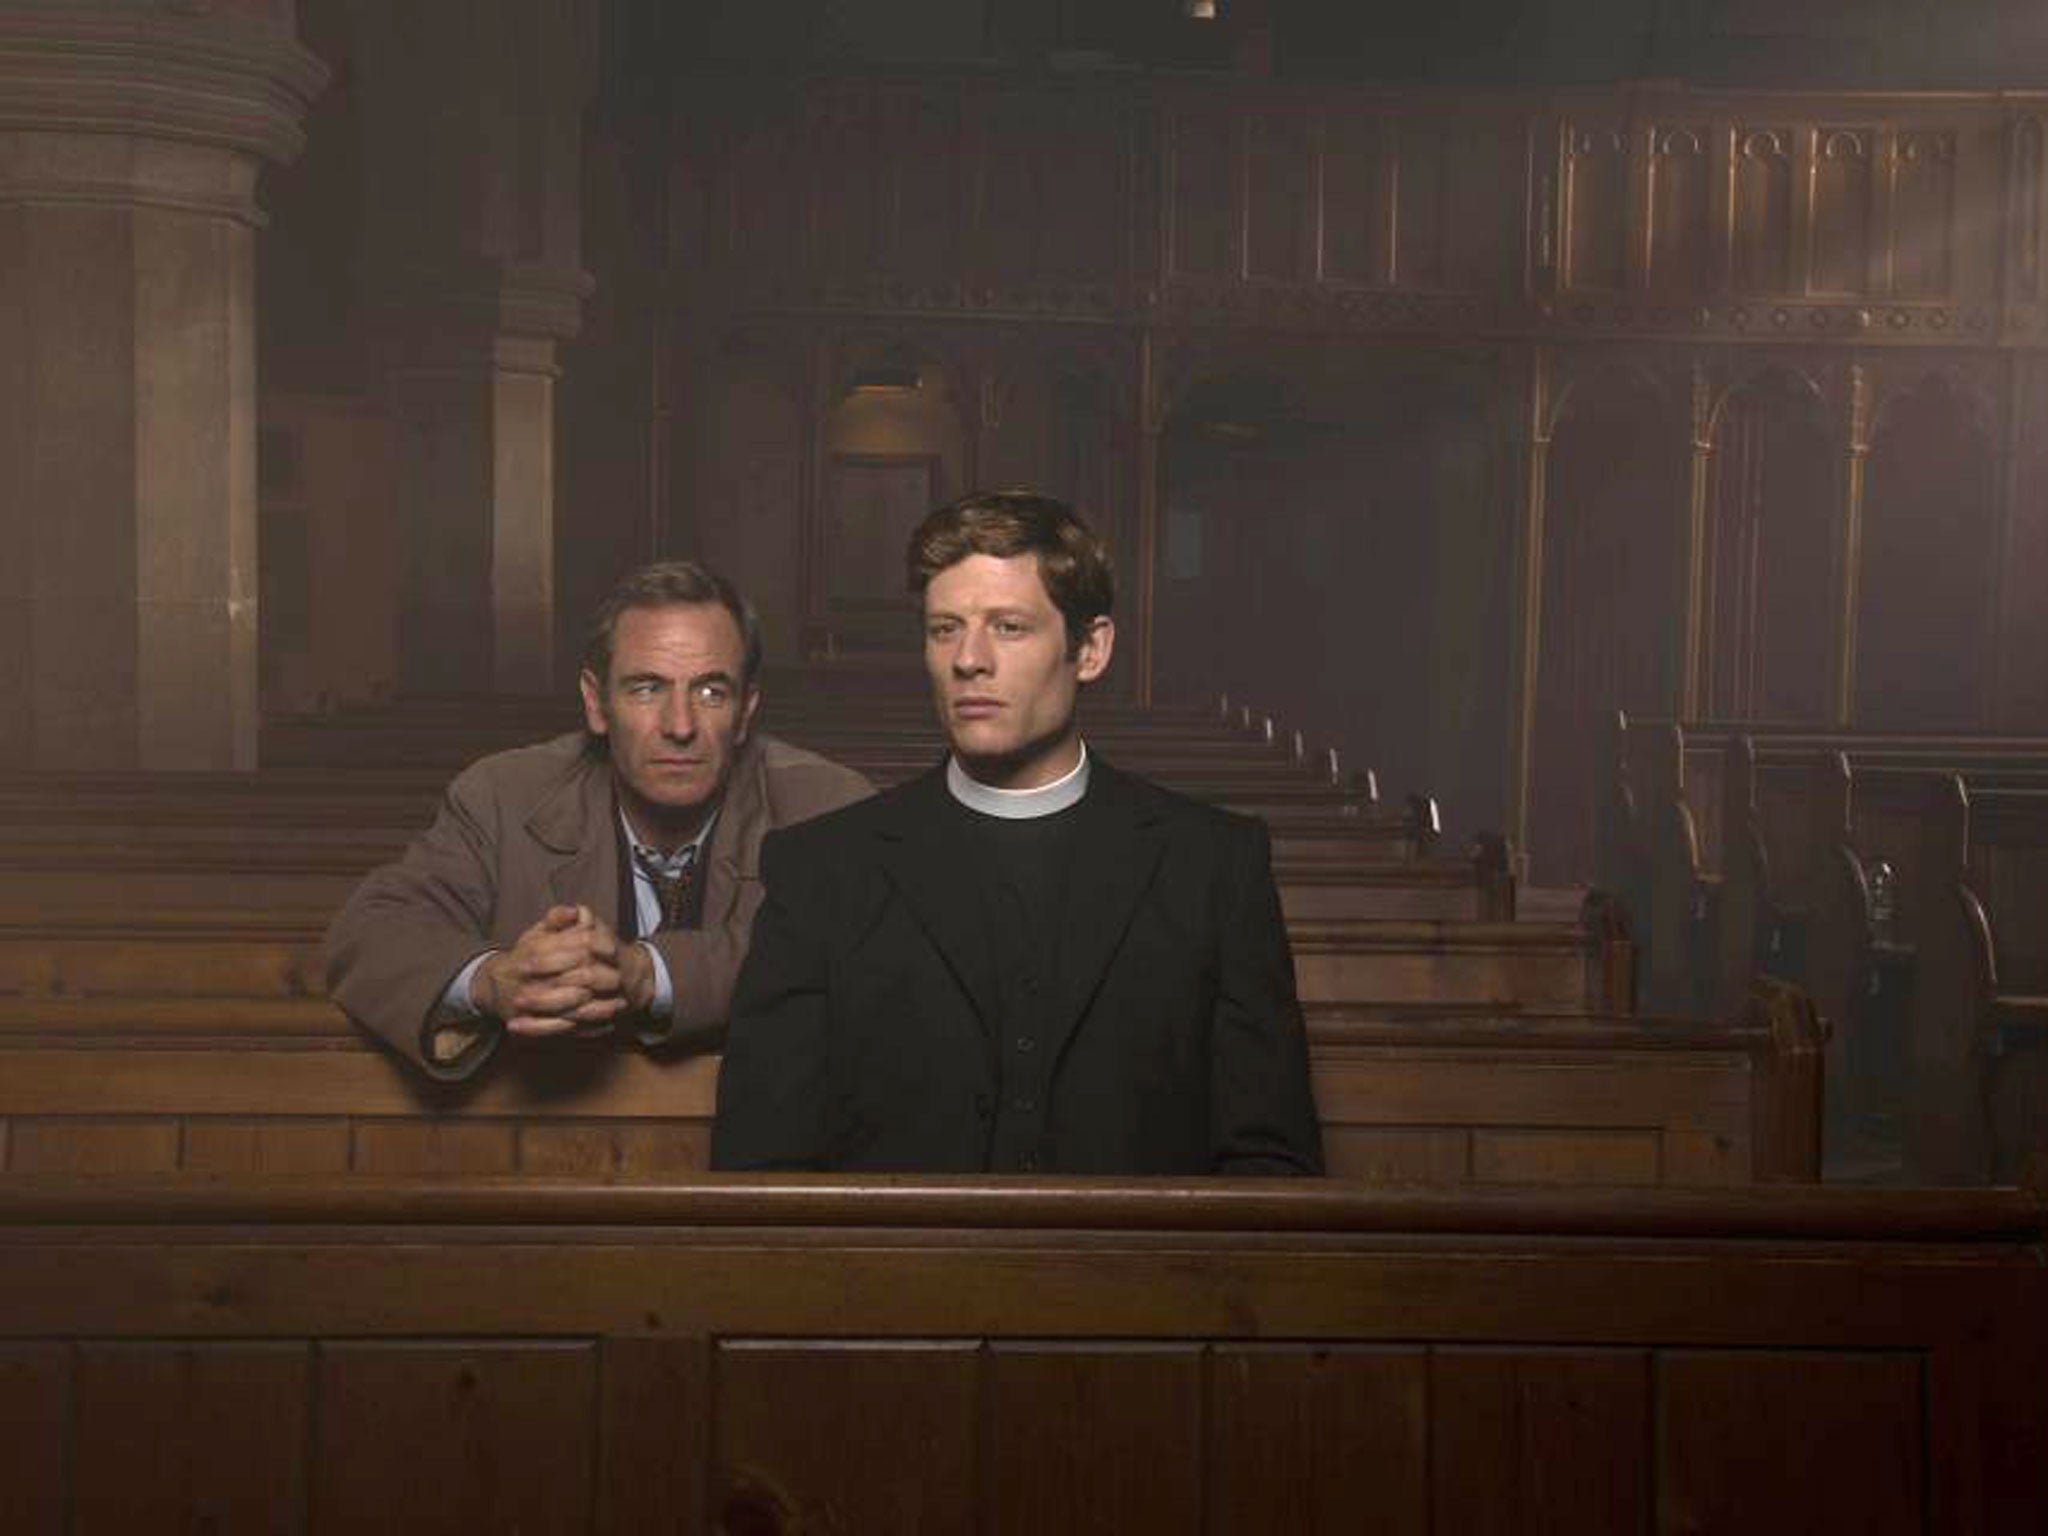 ‘The Road to Grantchester’ is the perfect TV tie-in for those who will miss the ‘Grantchester’ series